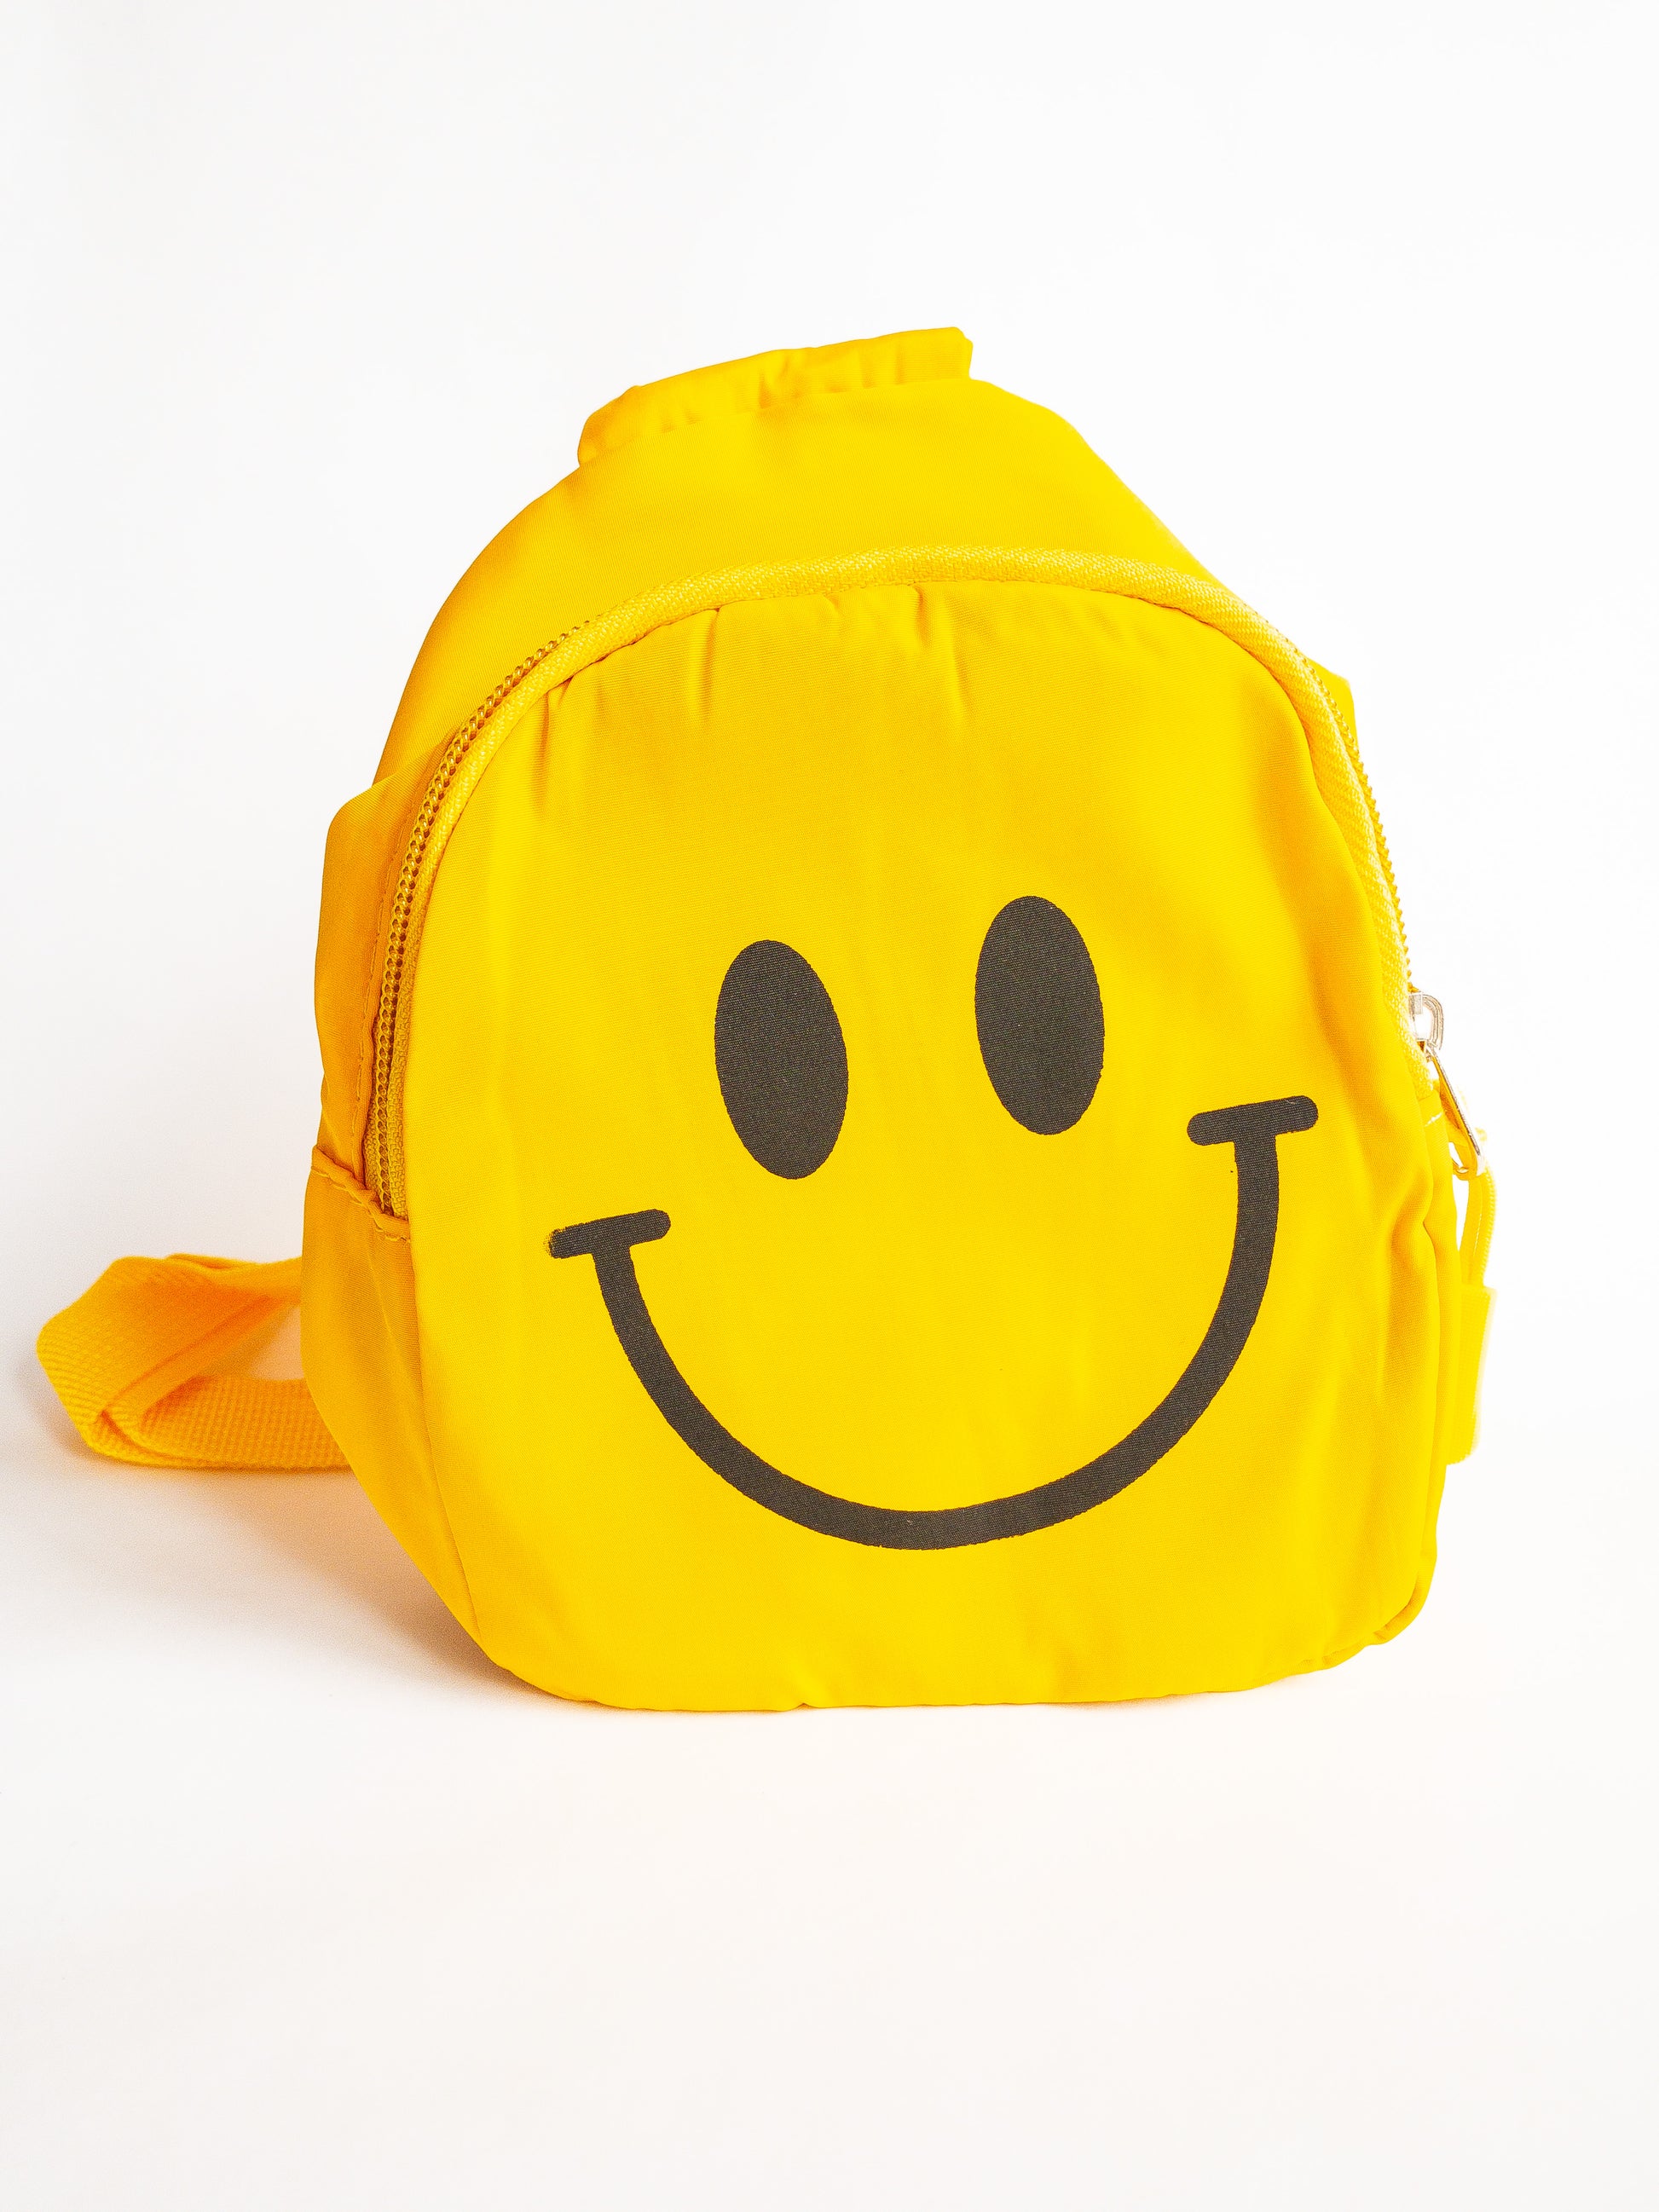 Just a slice of instant happiness. This cute smiley face crossbody or slingback bag is the perfect size for kids. It has a cable cord pull zipper which opens up to a single compartment and is super lightweight with adjustable straps. Wear it front or back.